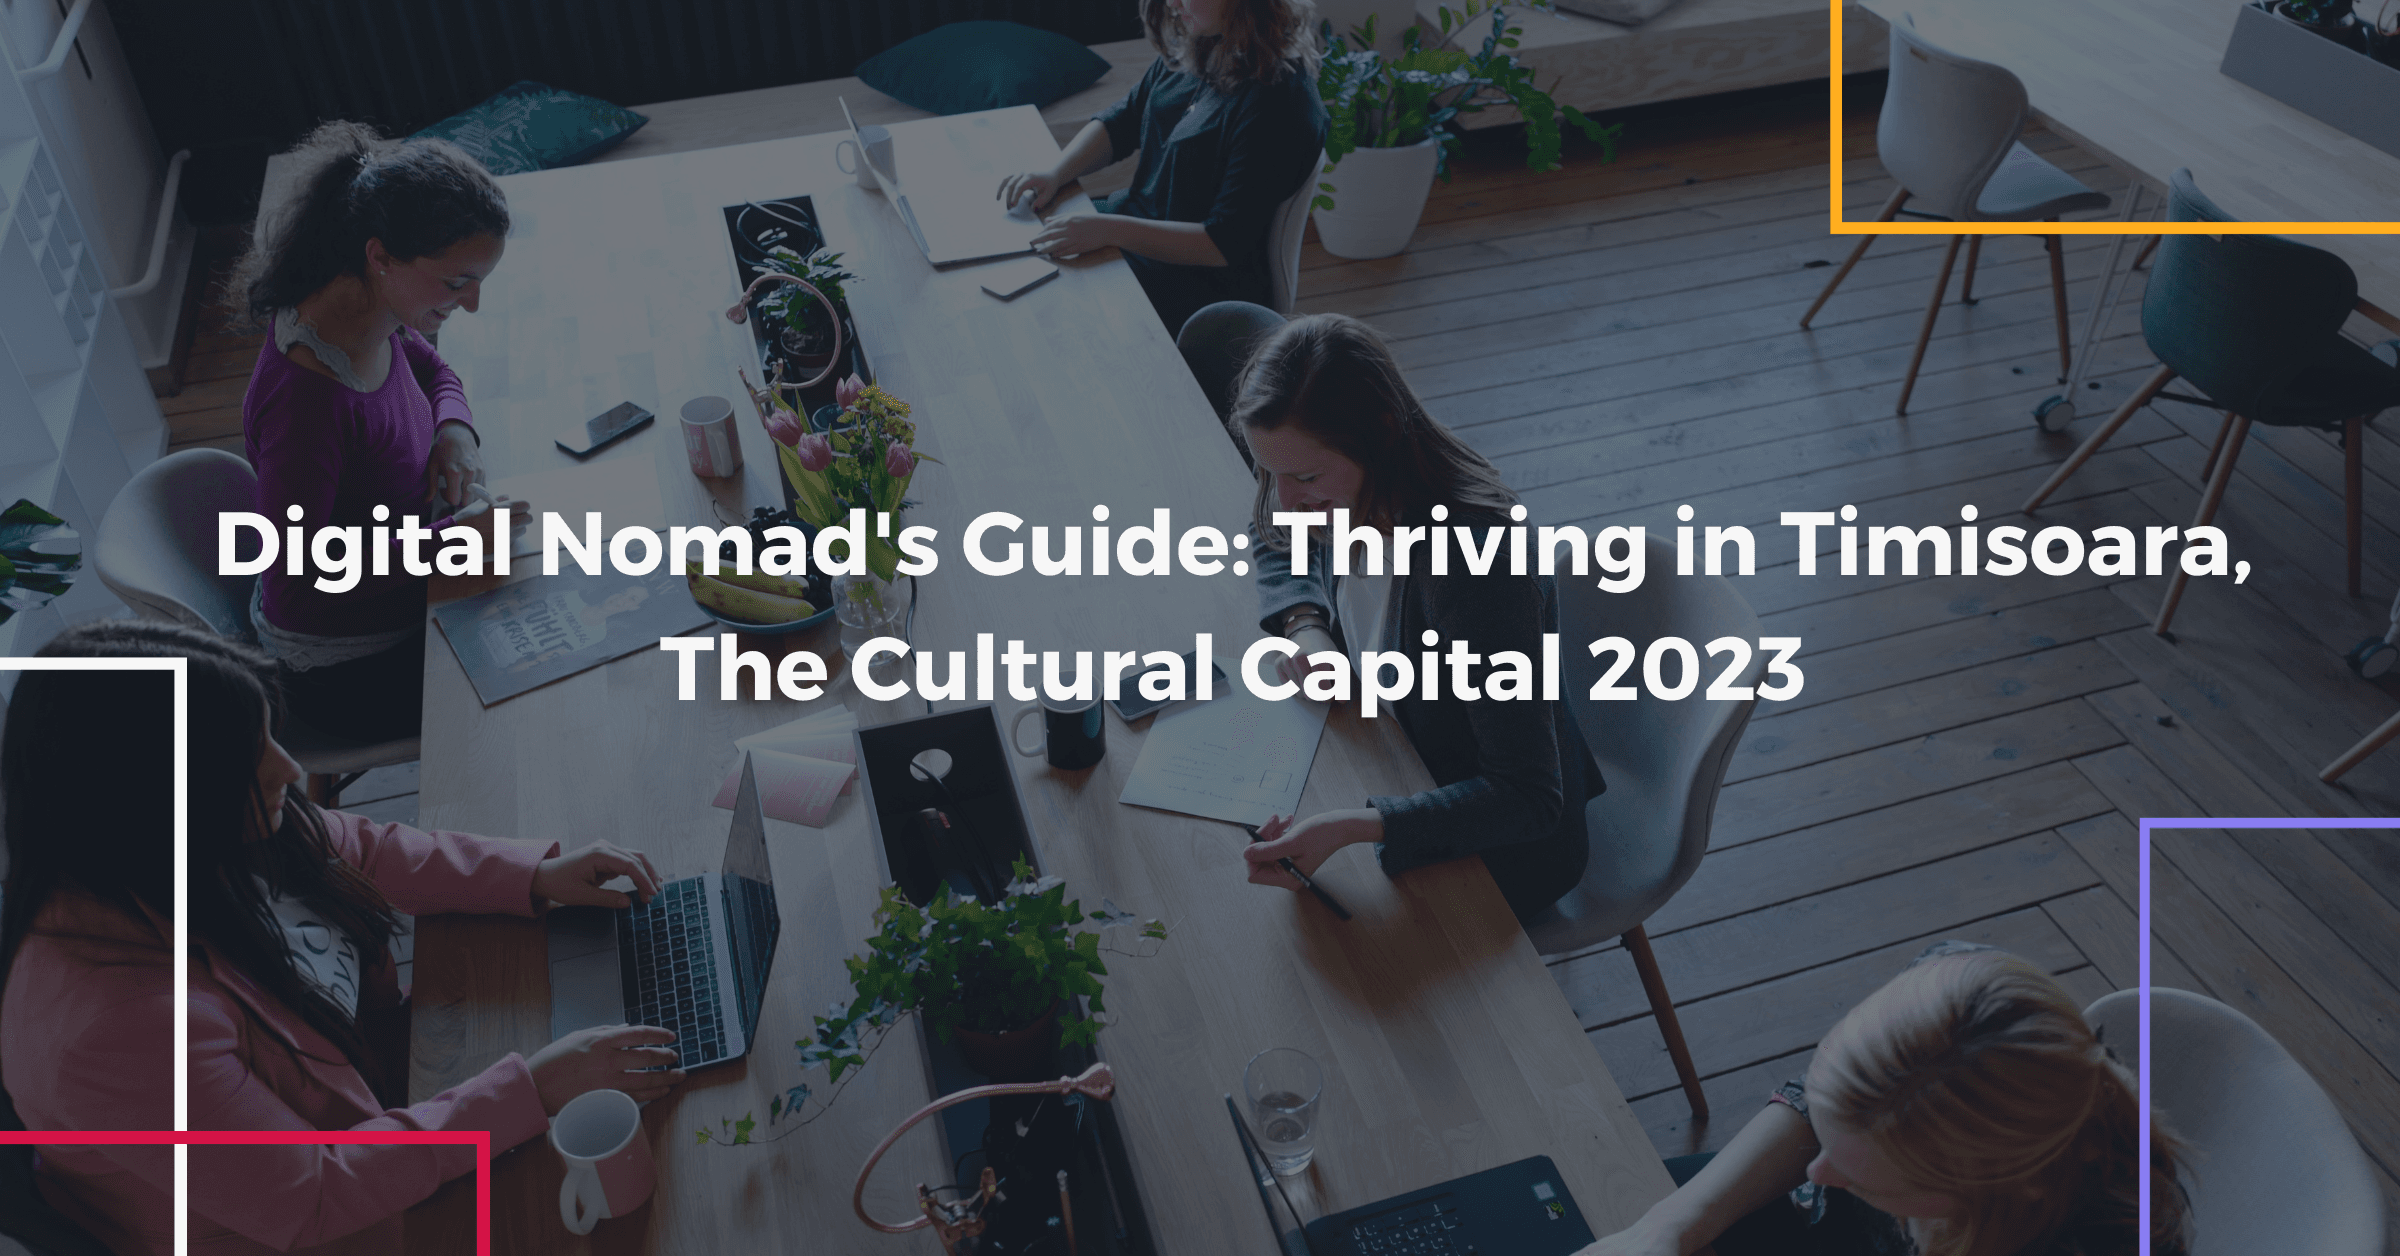 DIGITAL NOMAD’S GUIDE: THRIVING IN TIMISOARA, THE CULTURAL CAPITAL, 2023